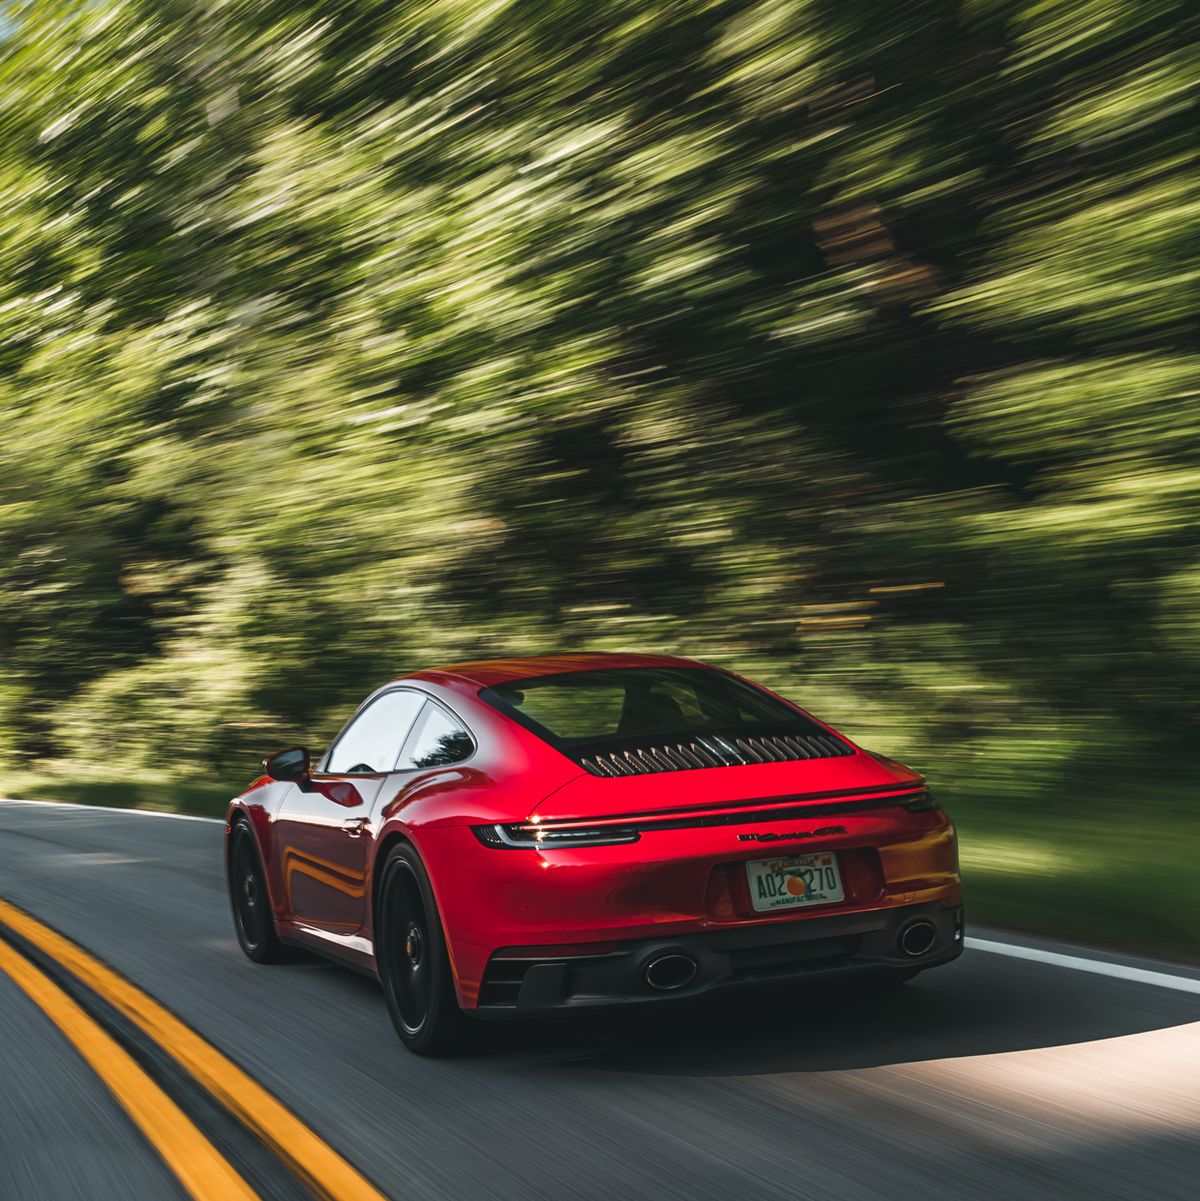 More distinctive and dynamic than ever: the new Porsche 911 GTS